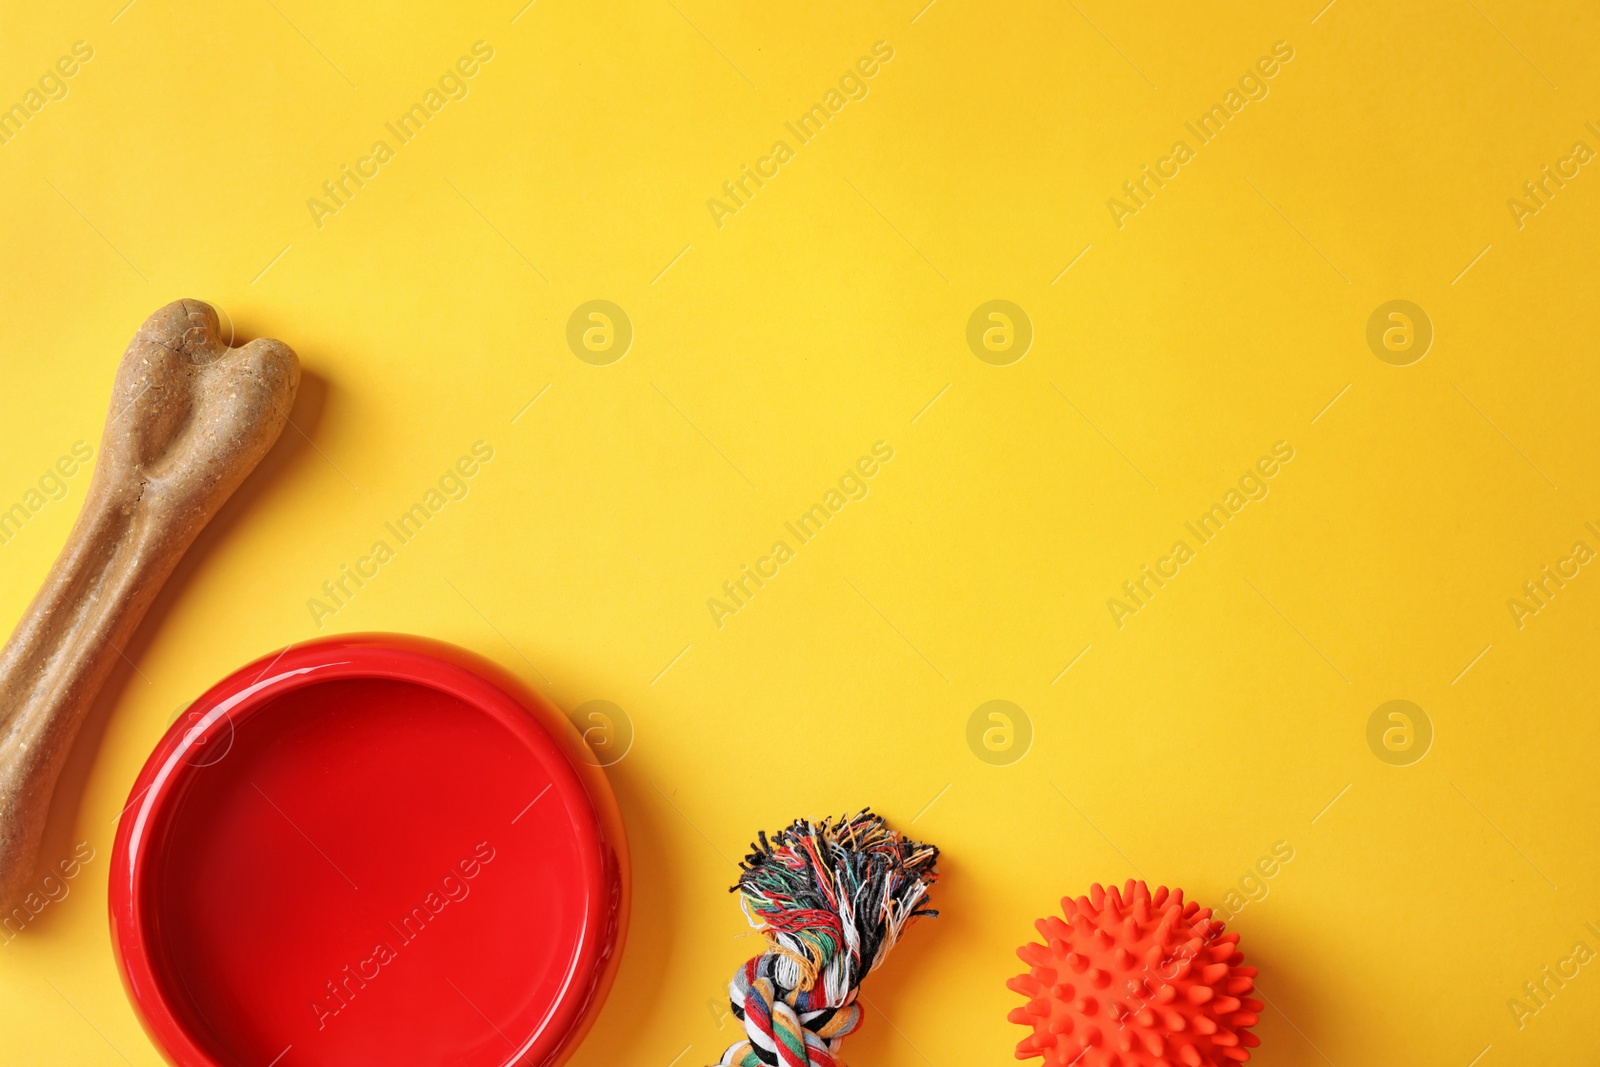 Photo of Flat lay composition with accessories for dog on color background. Pet care